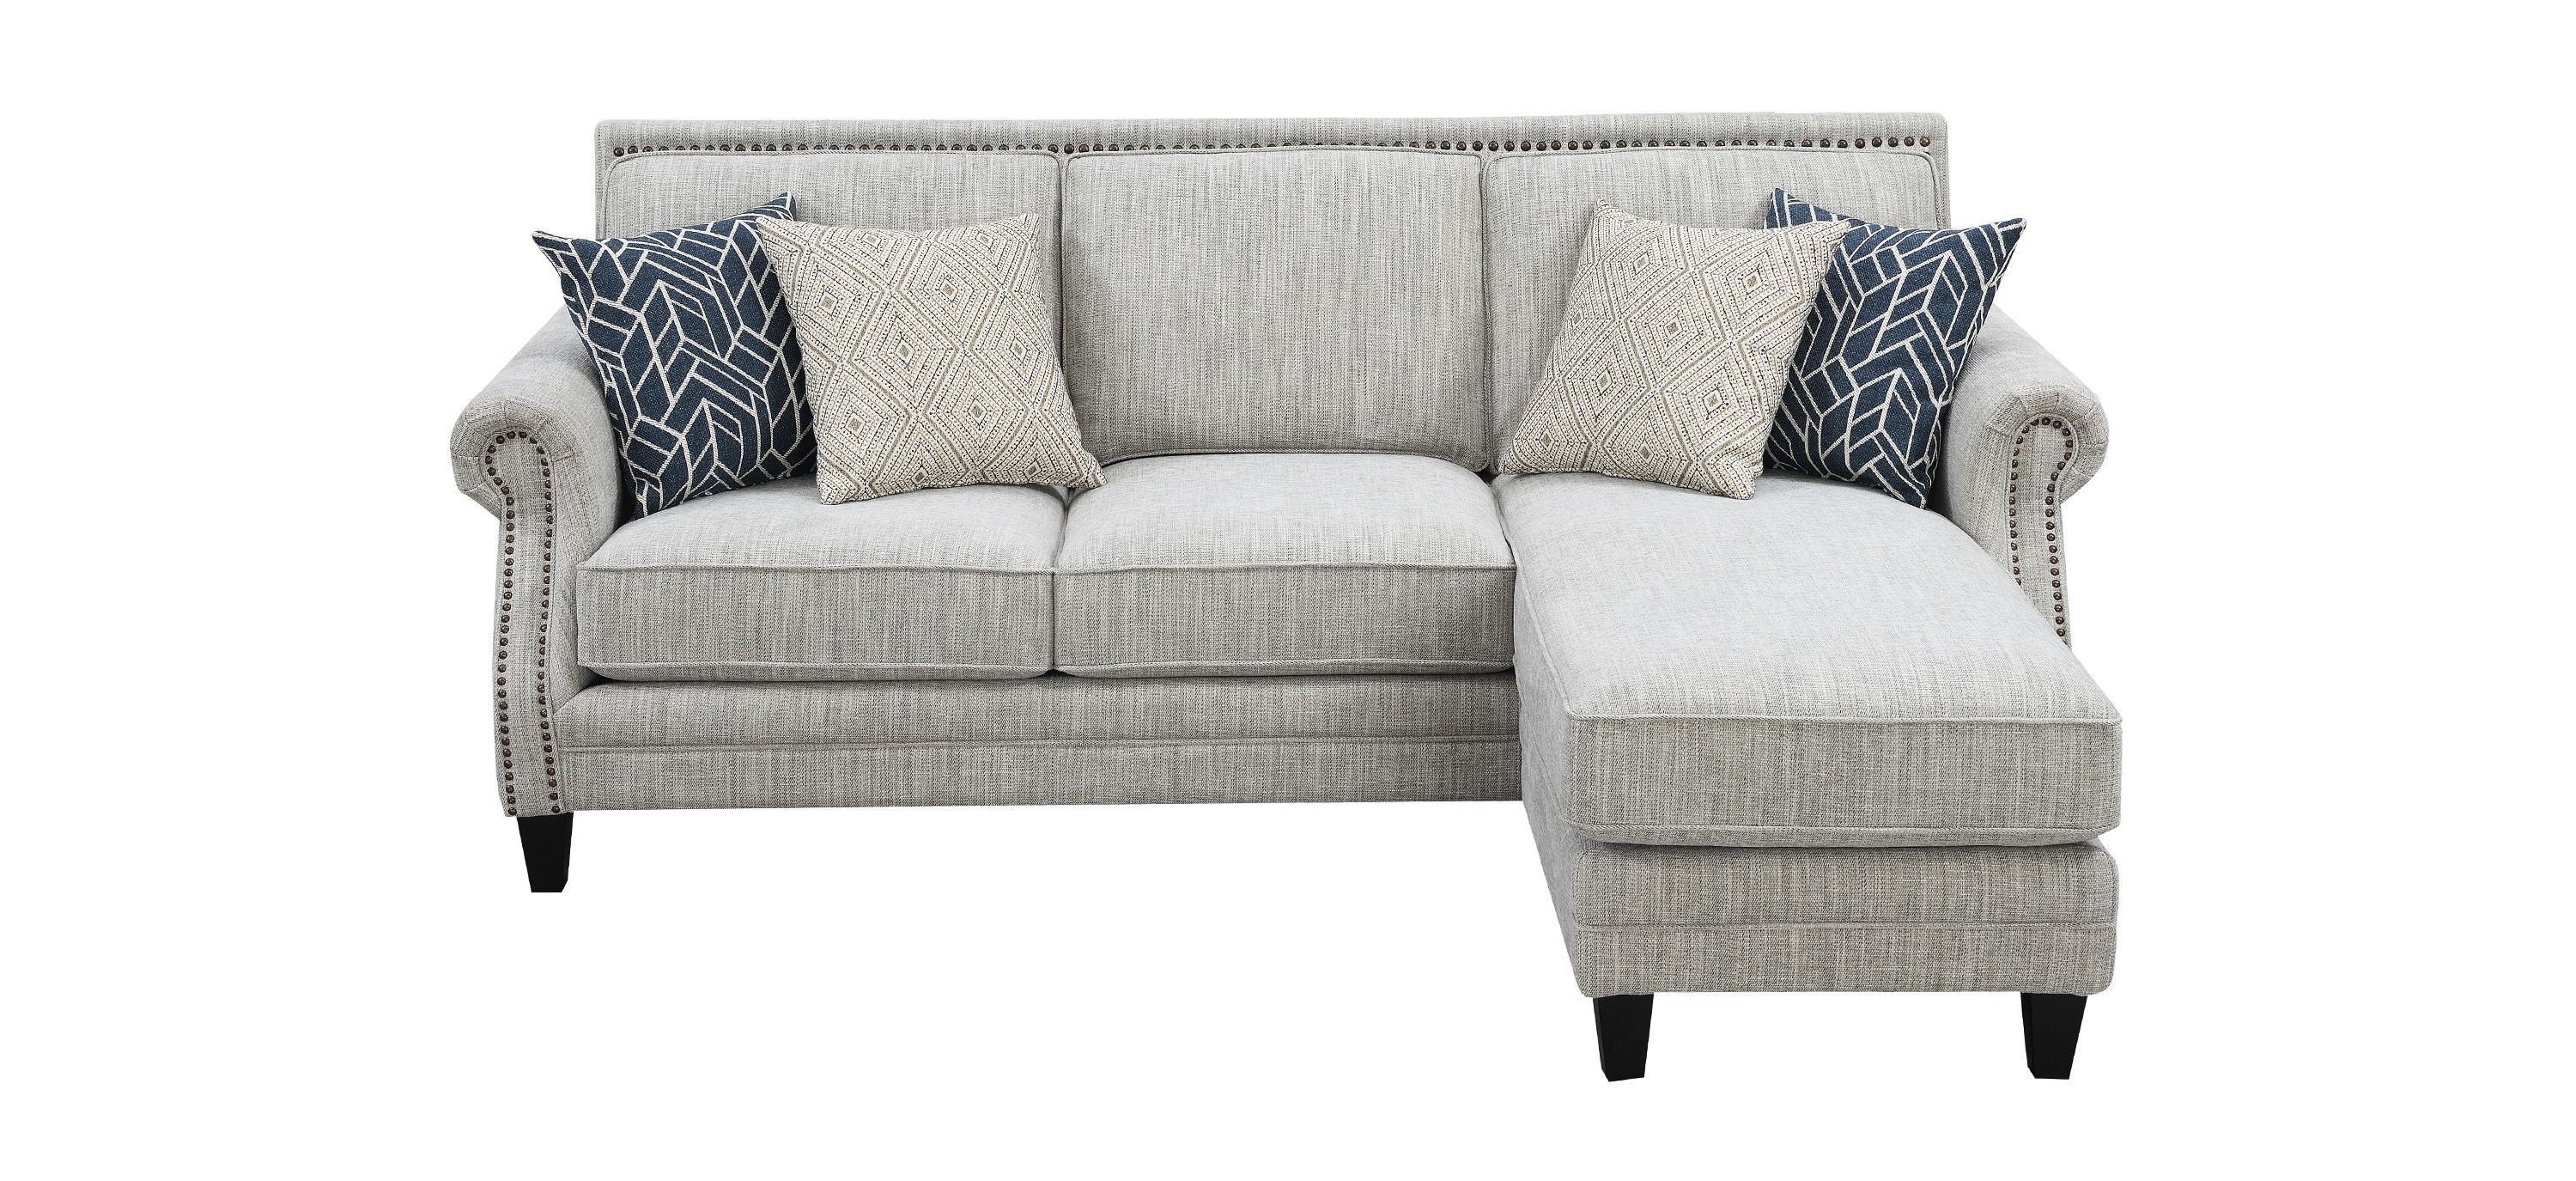 Trilogy Reversible Chaise Sectional